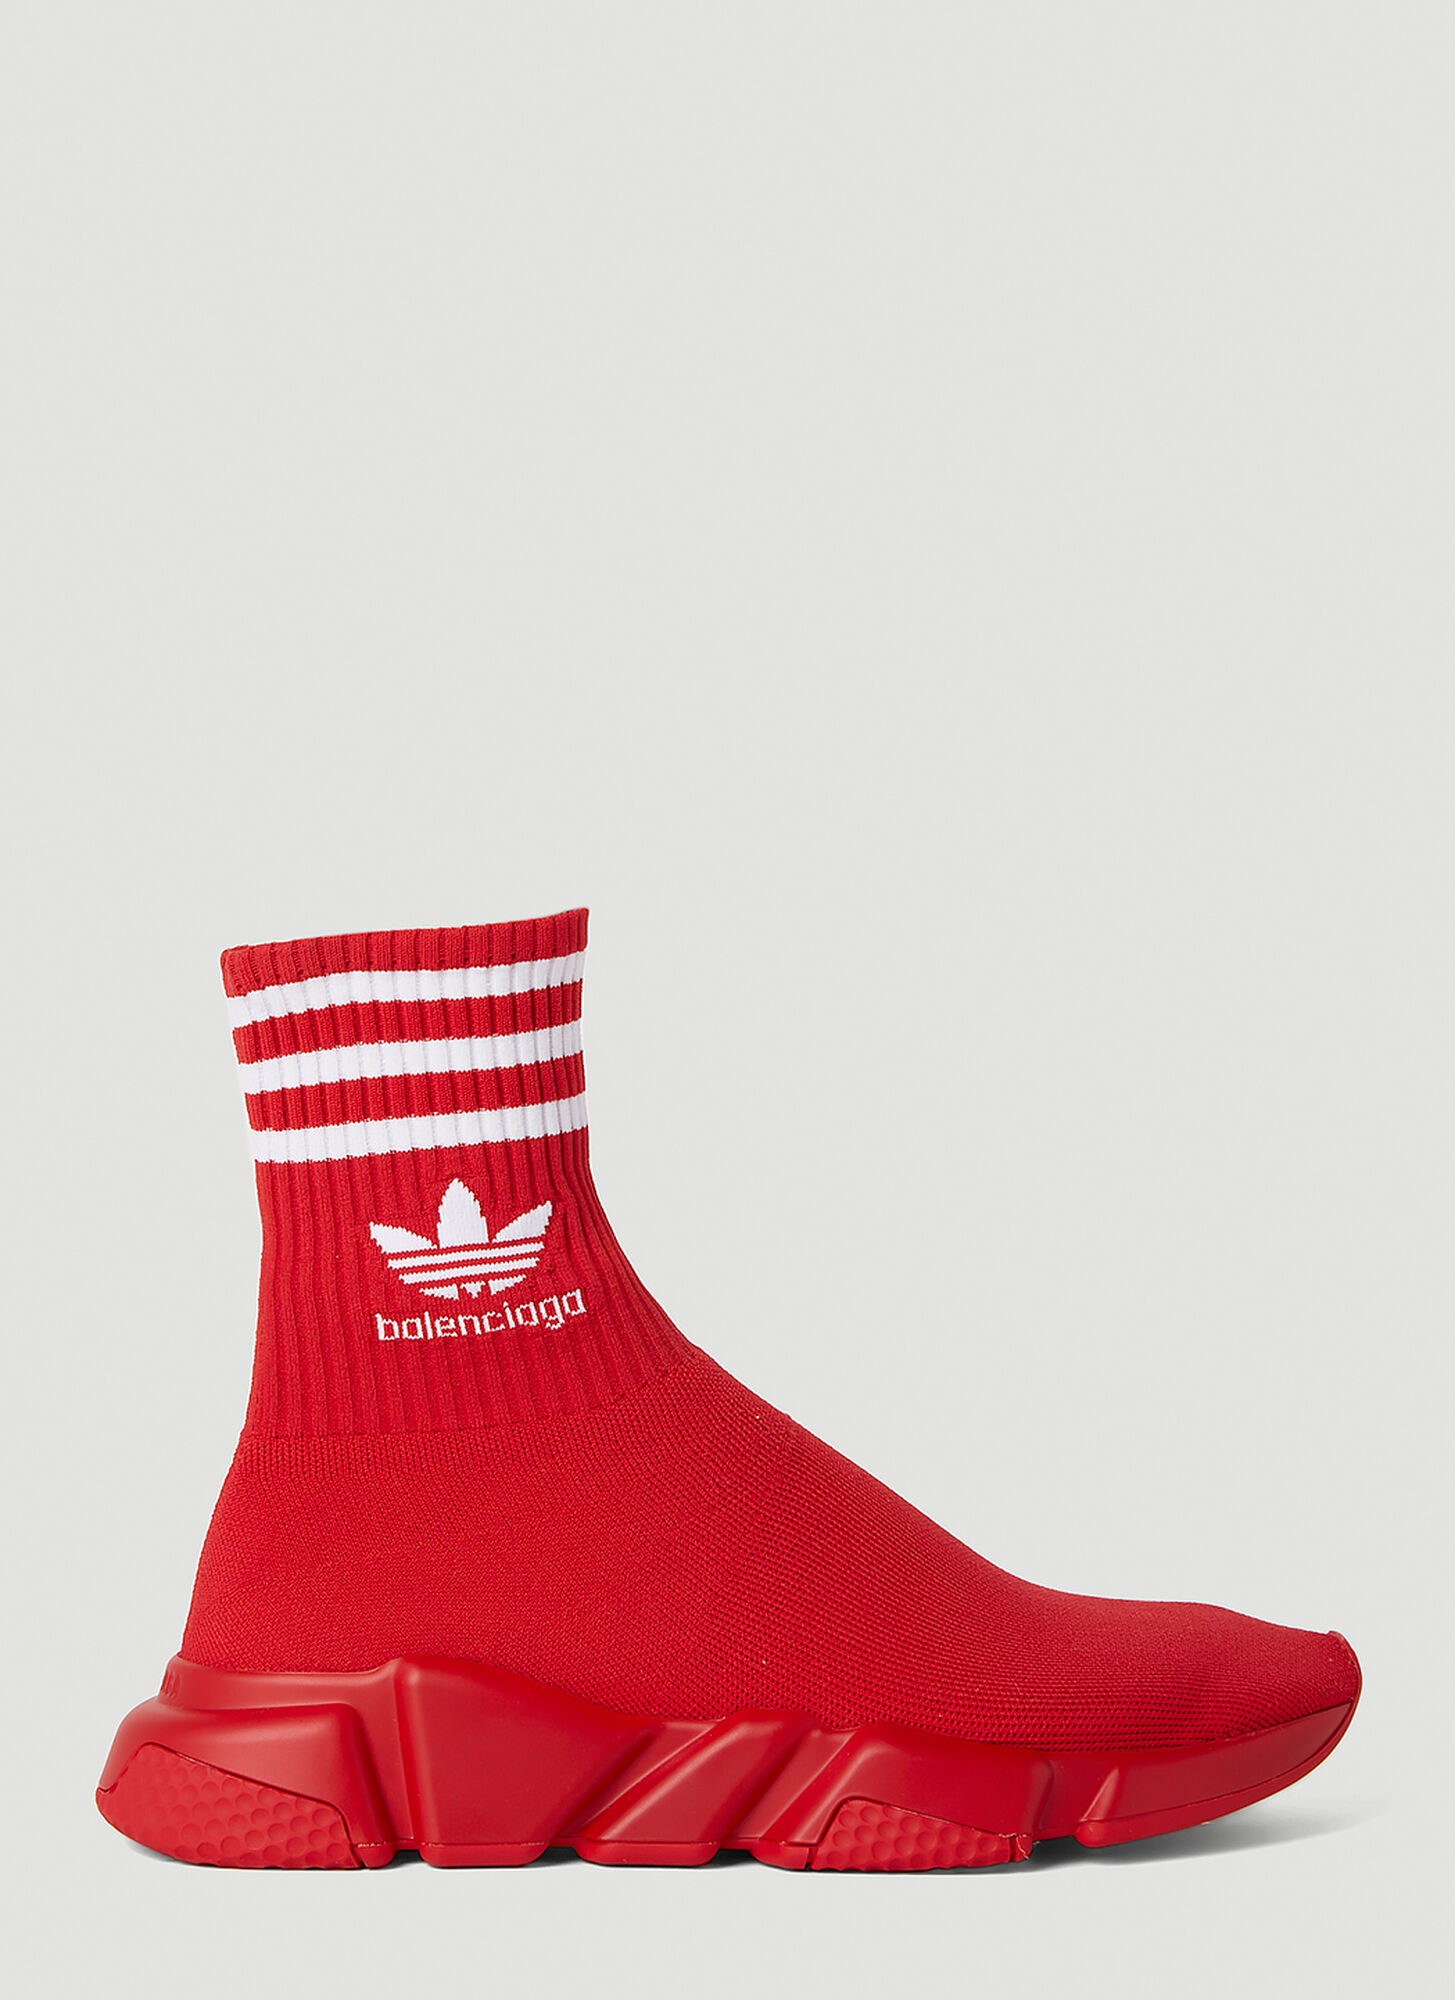 Adidas X Balenciaga Speed Sneakers In Red